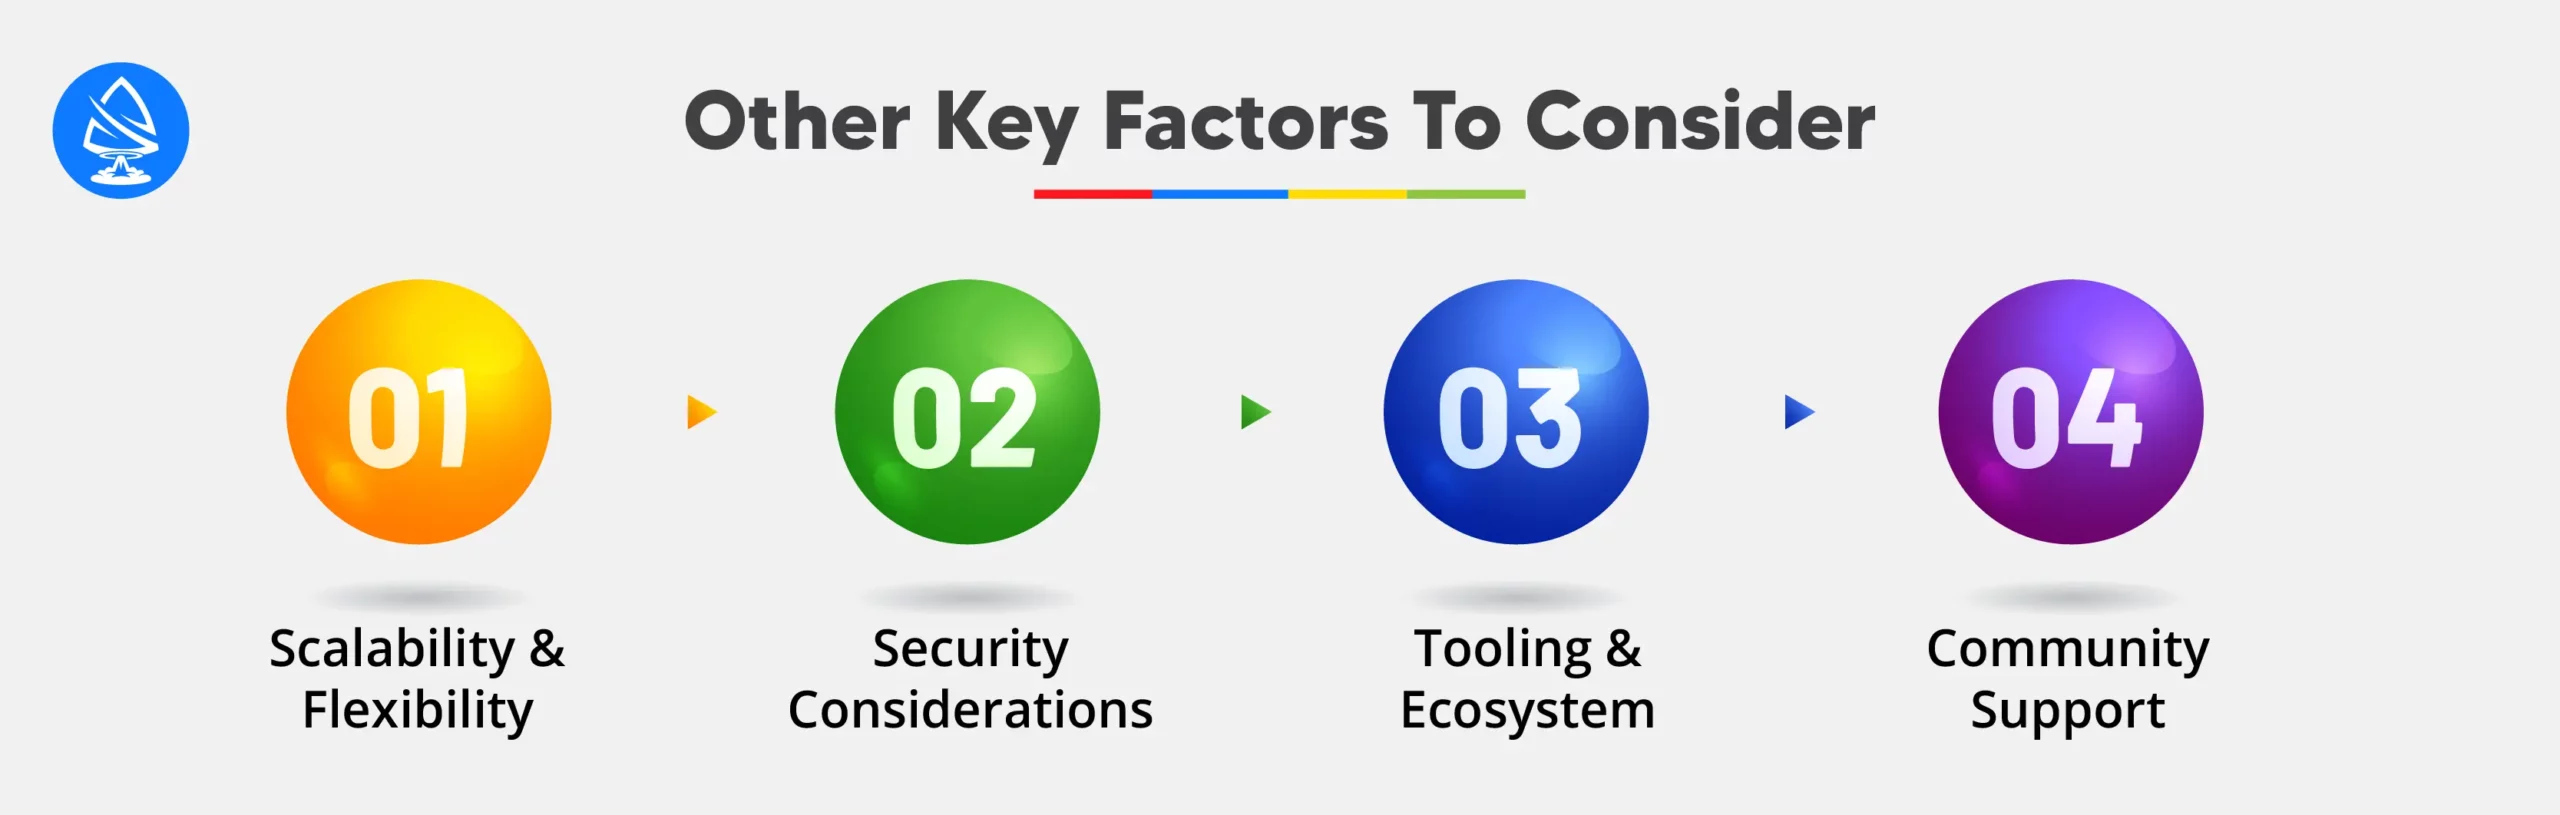 Other Key Factors to Consider 